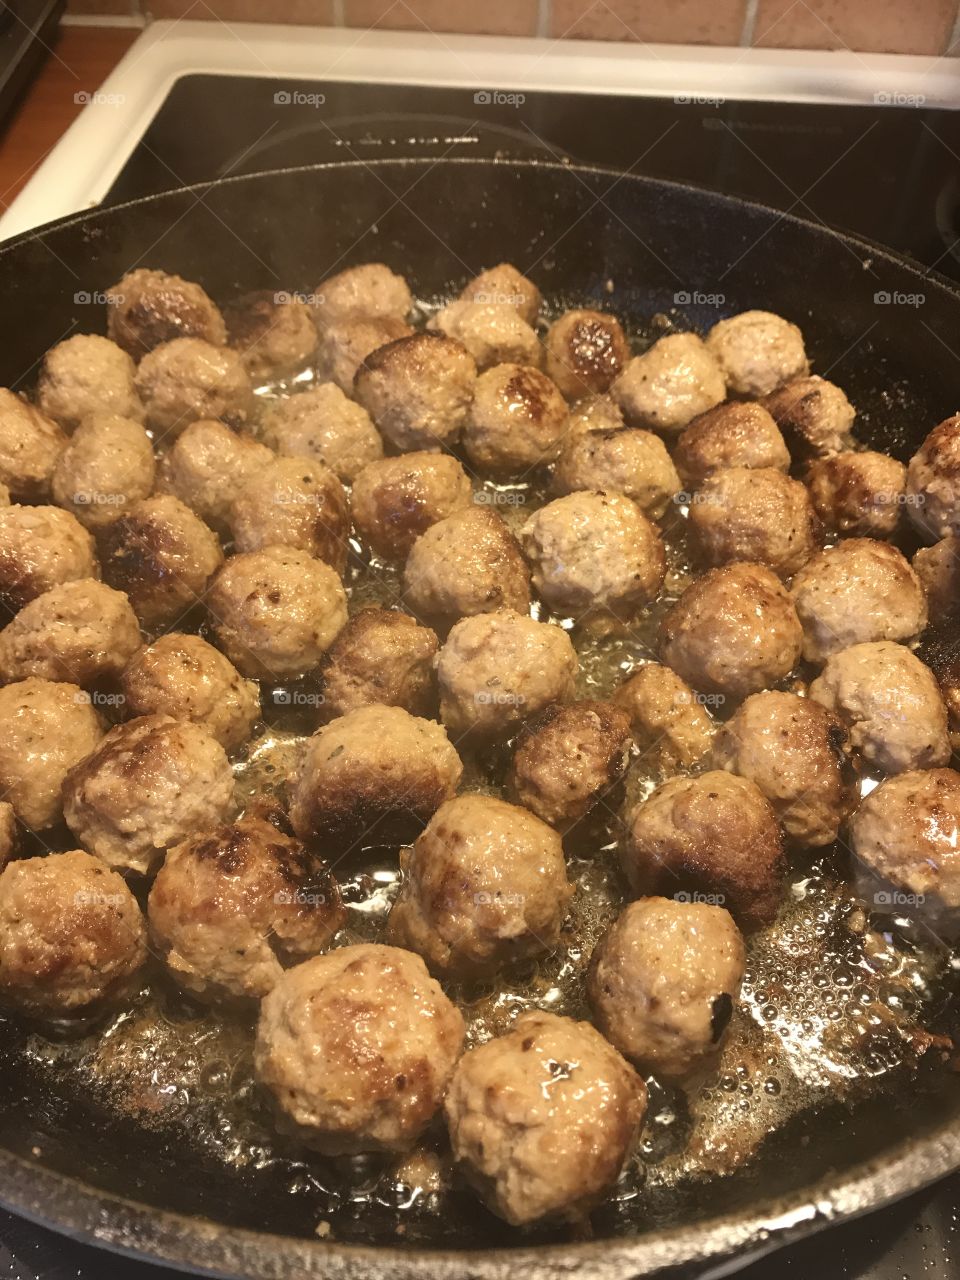 Swedish meatballs in frying pan. Swedish classic dish and food that is worldwide famous. 